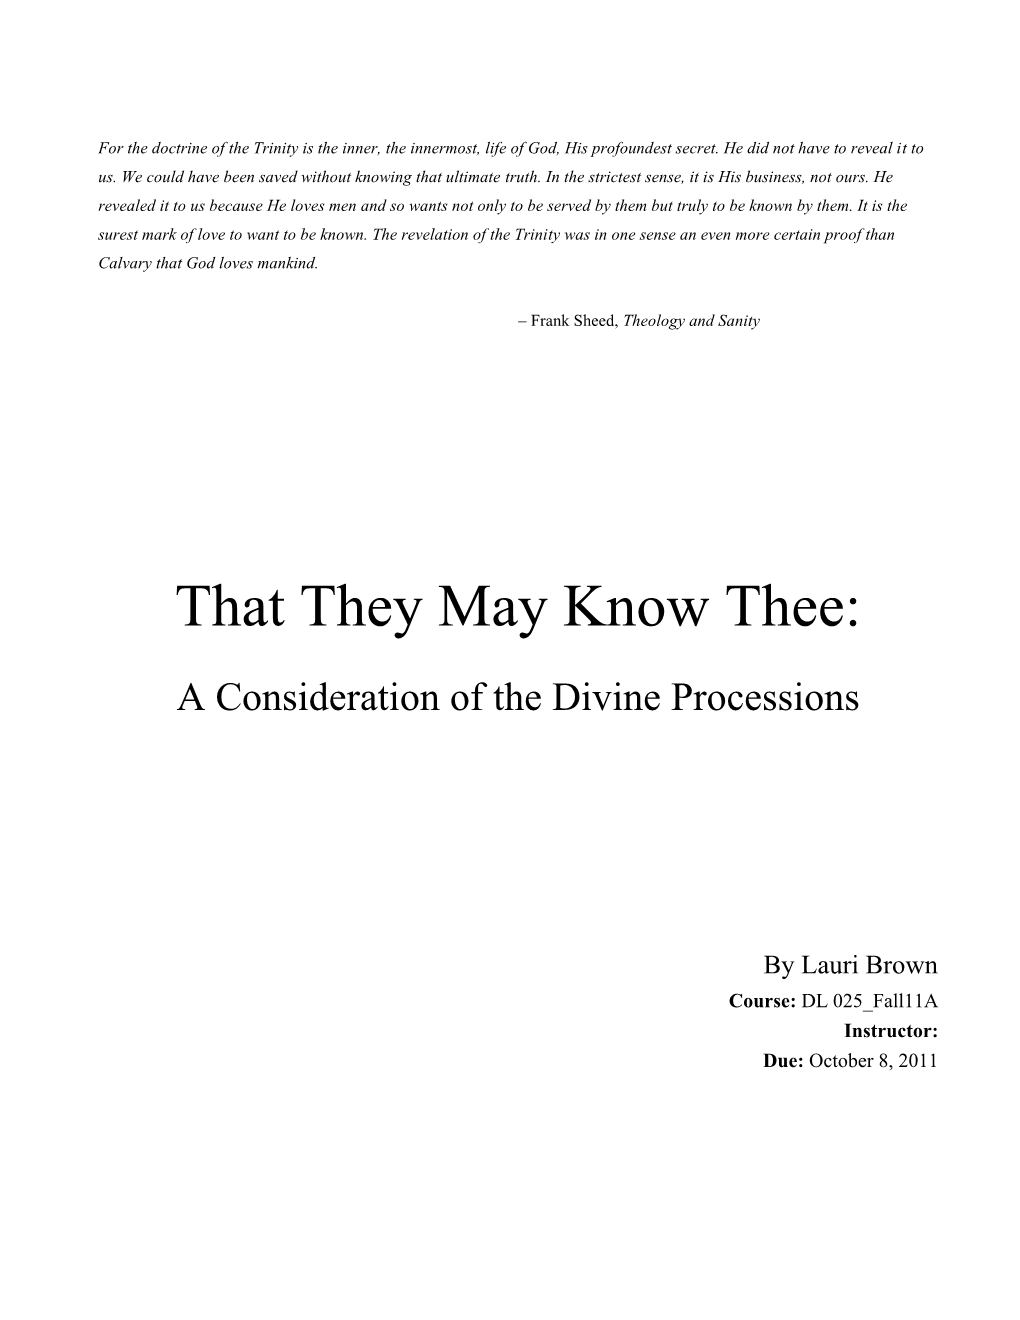 That They May Know Thee: a Consideration of the Divine Processions